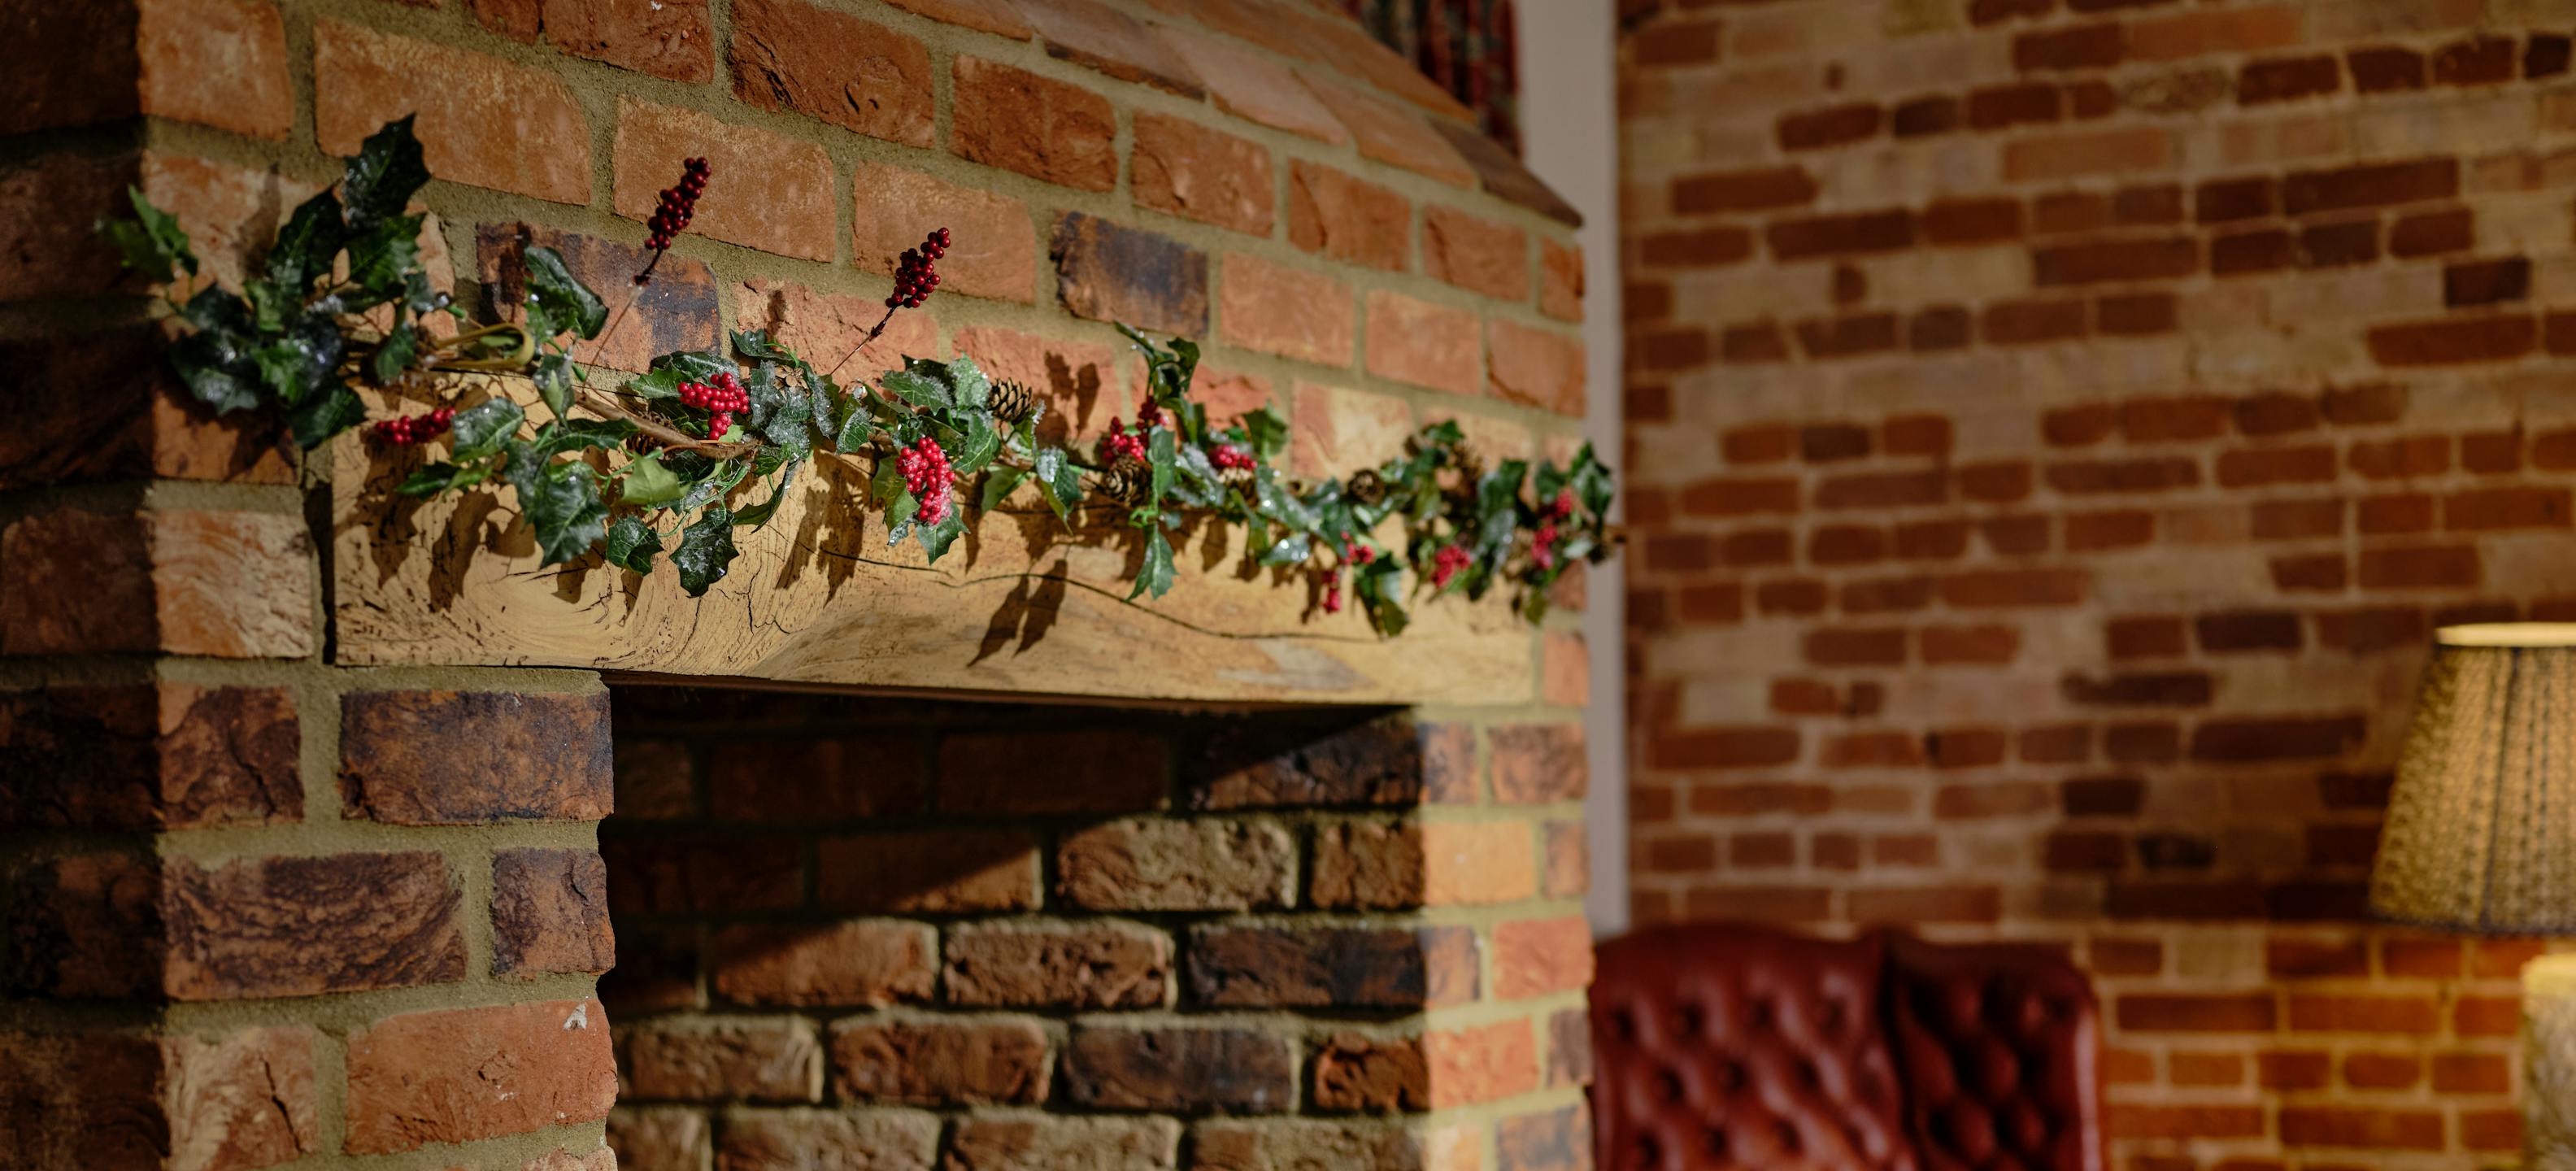 Pure holly garland green and red over fireplace